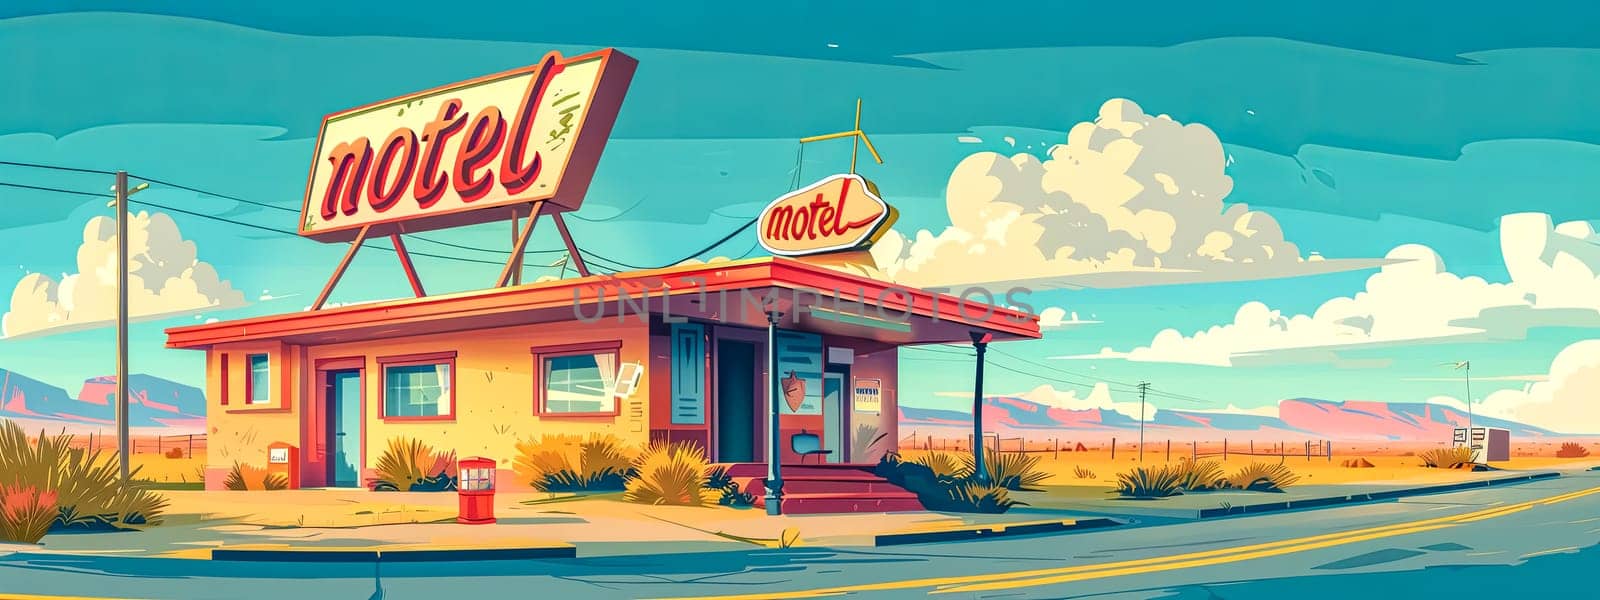 Retro vintage desert motel panoramic illustration with vibrant sunny sky and empty road. Showcasing nostalgic americana hospitality and neon signage in a quaint mid-century rural landscape